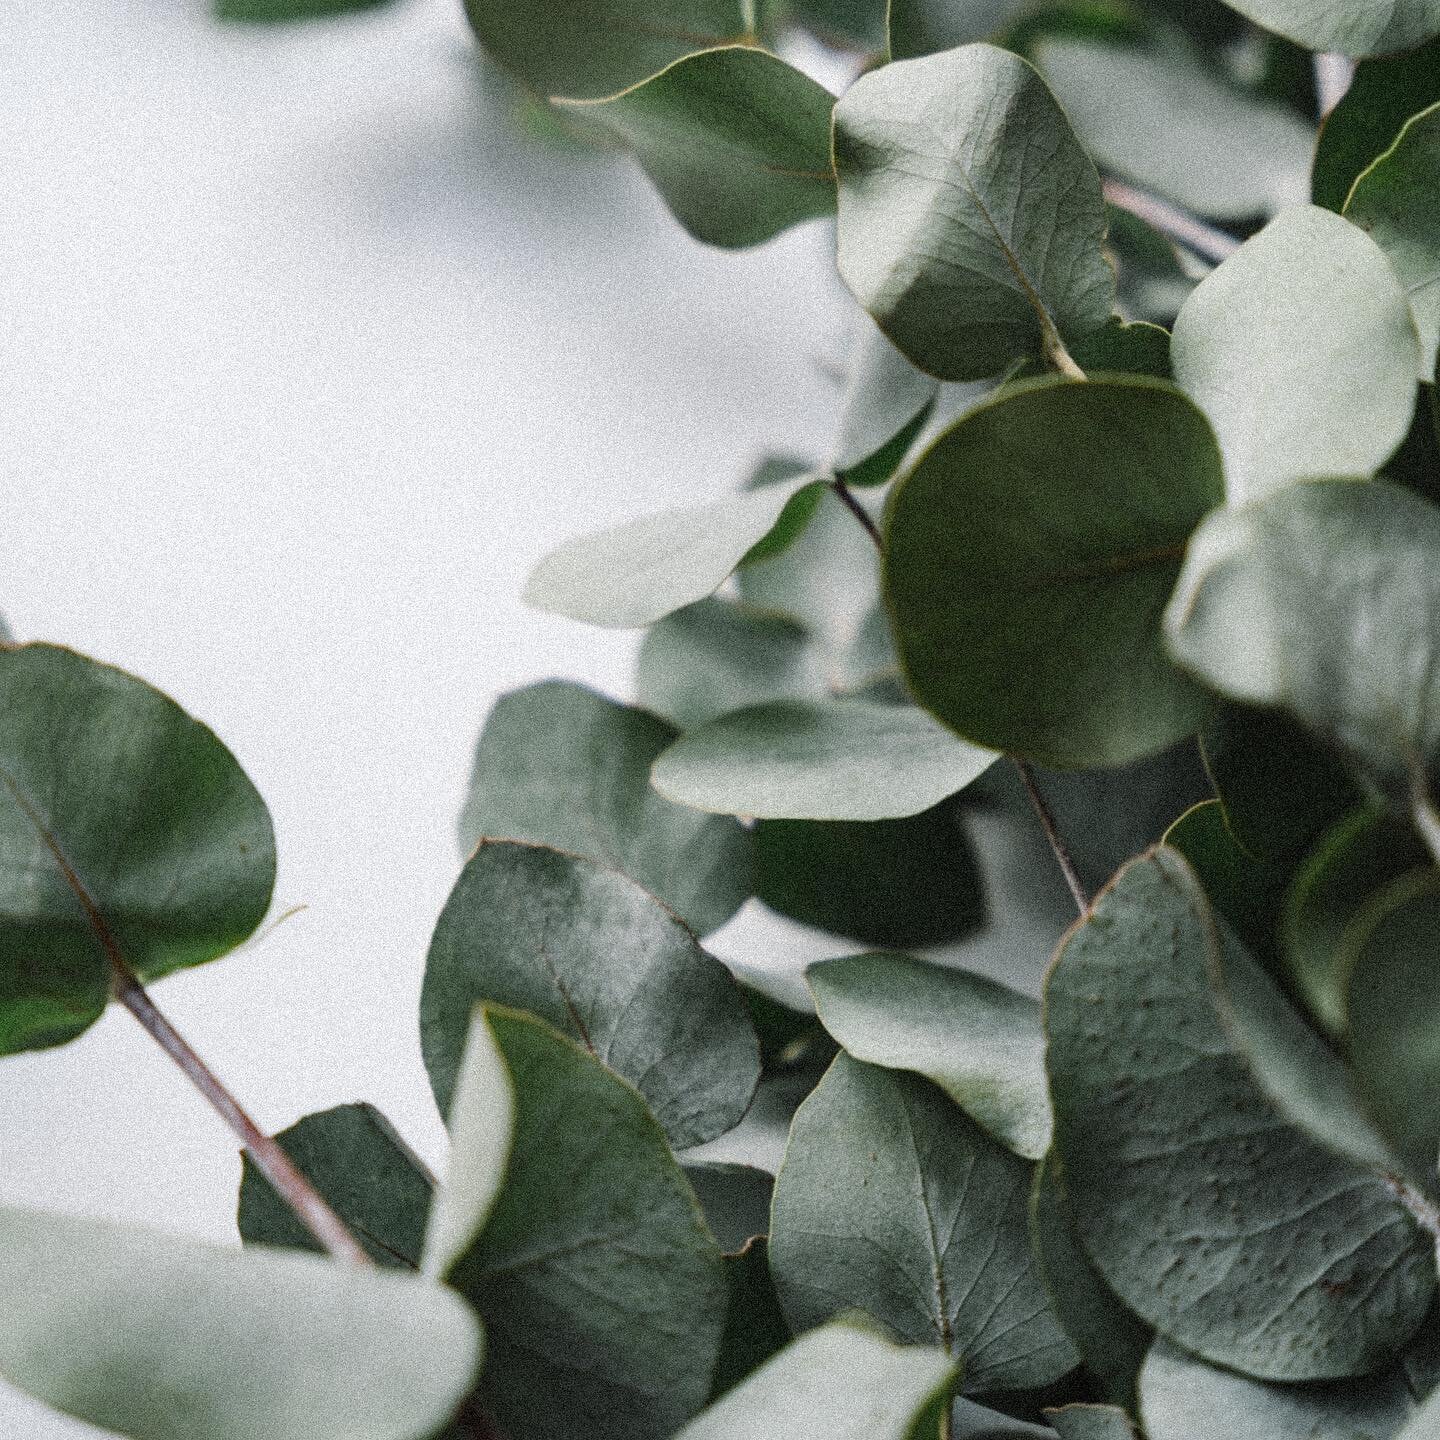 Native to Australia, and used traditionally as a medicinal herb by the Indigenous, EUCALYPTUS has powerful antiseptic properties that we can all benefit from. Learn how it was introduced to the rest of the world, and how to use it in your home - in p